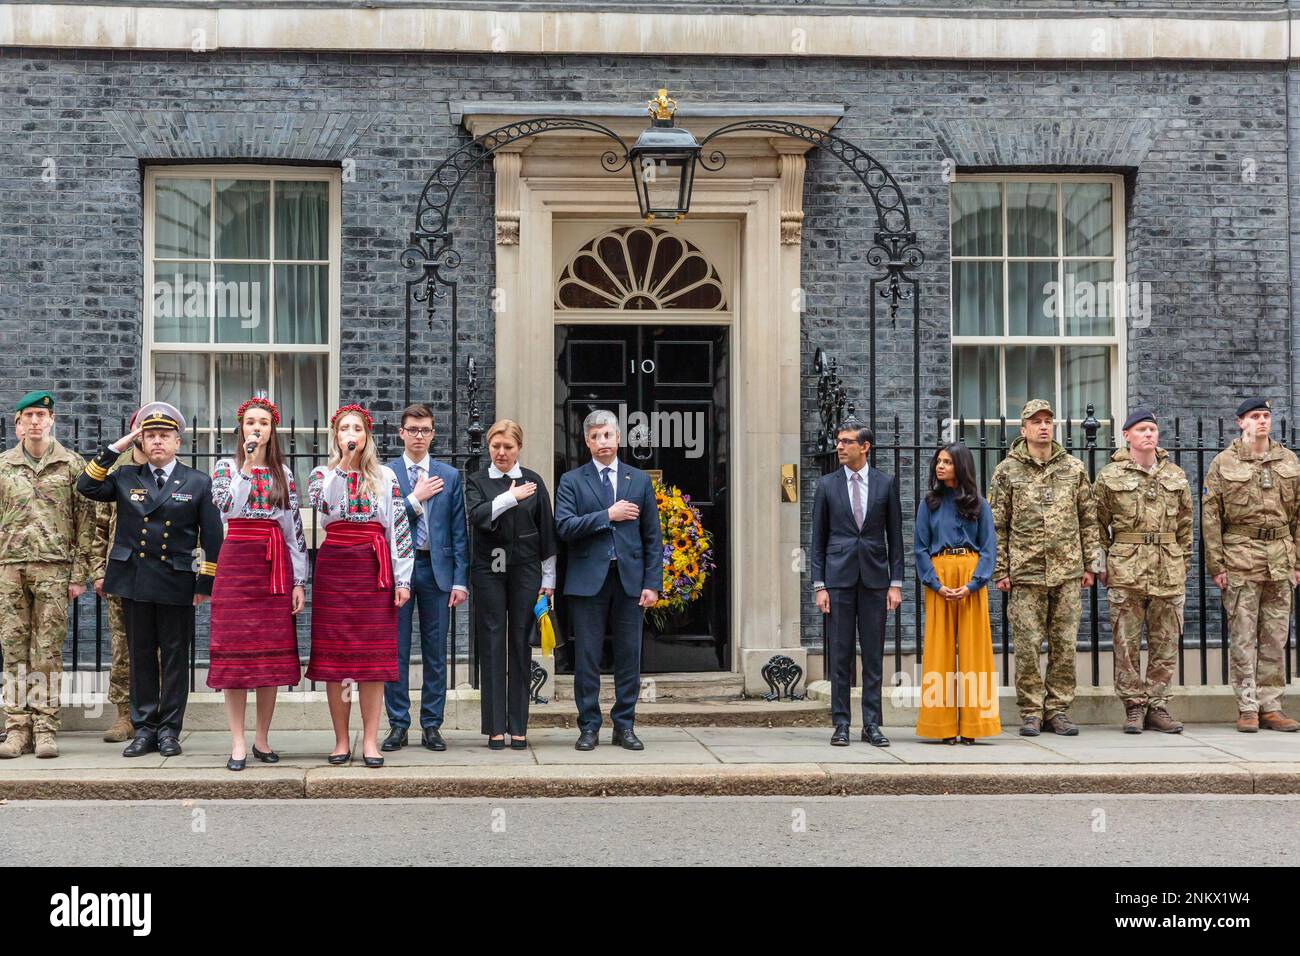 Downing Street, London, UK. 24th February 2023.  British Prime Minister, Rishi Sunak and his wife welcome Ukrainian Ambassador to the UK, Vadym Prystaiko,his wife and son, members of the Ukrainian Armed Forces and representatives from each Interflex nation to Downing Street, to observe a minute’s silence to mark the one-year anniversary of the full-scale Russian invasion of Ukraine. Photo by Amanda Rose/Alamy Live News Stock Photo